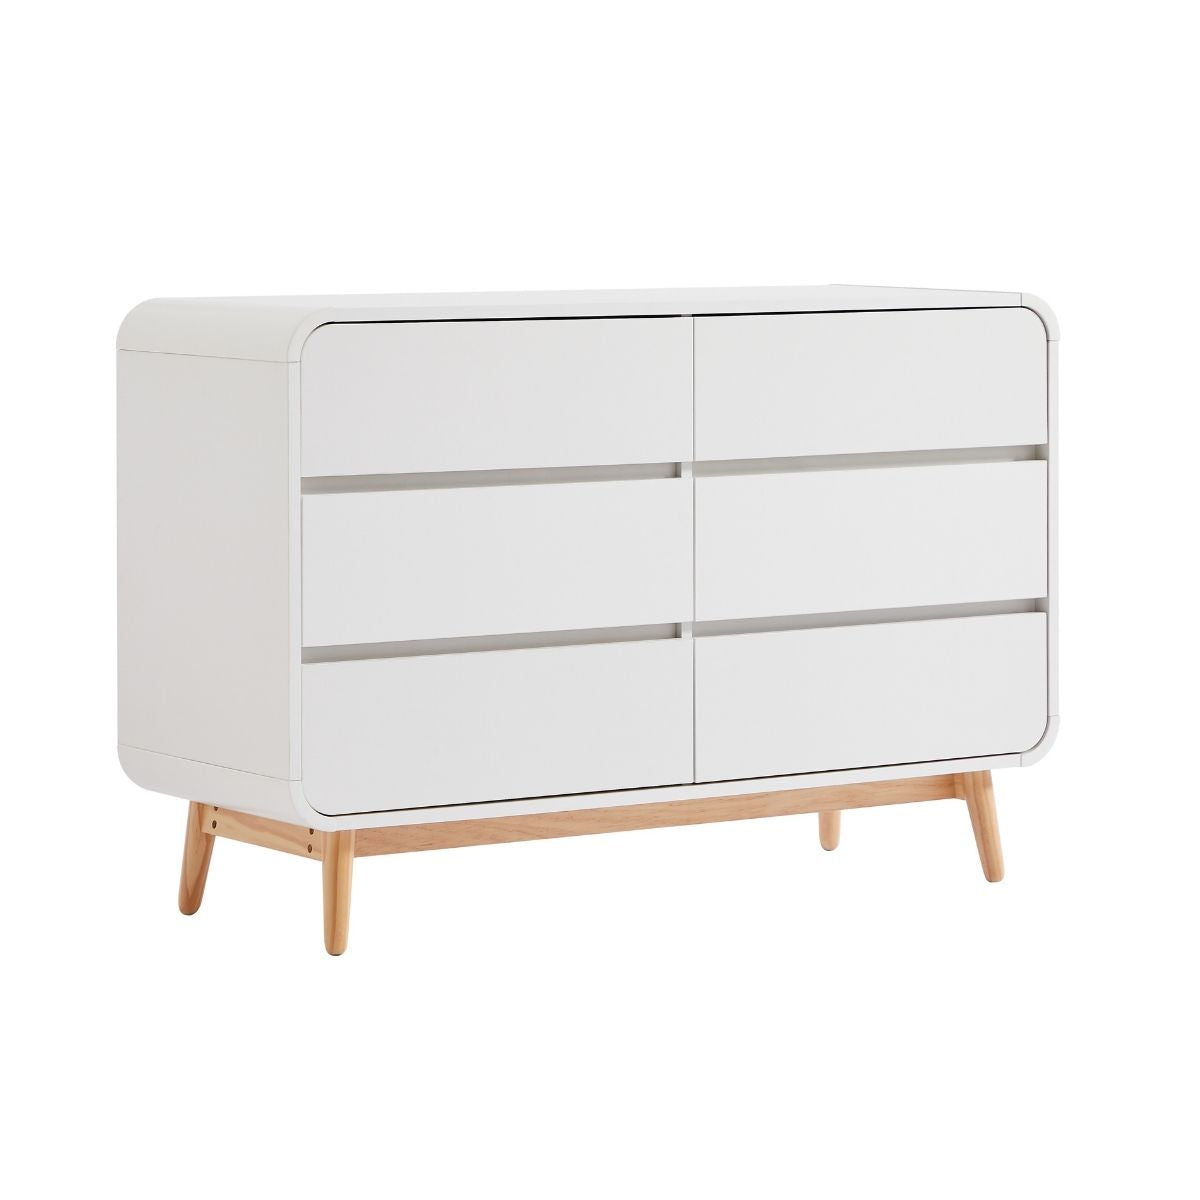 Merlin Modern Retro Chest of Drawers - White and Oak